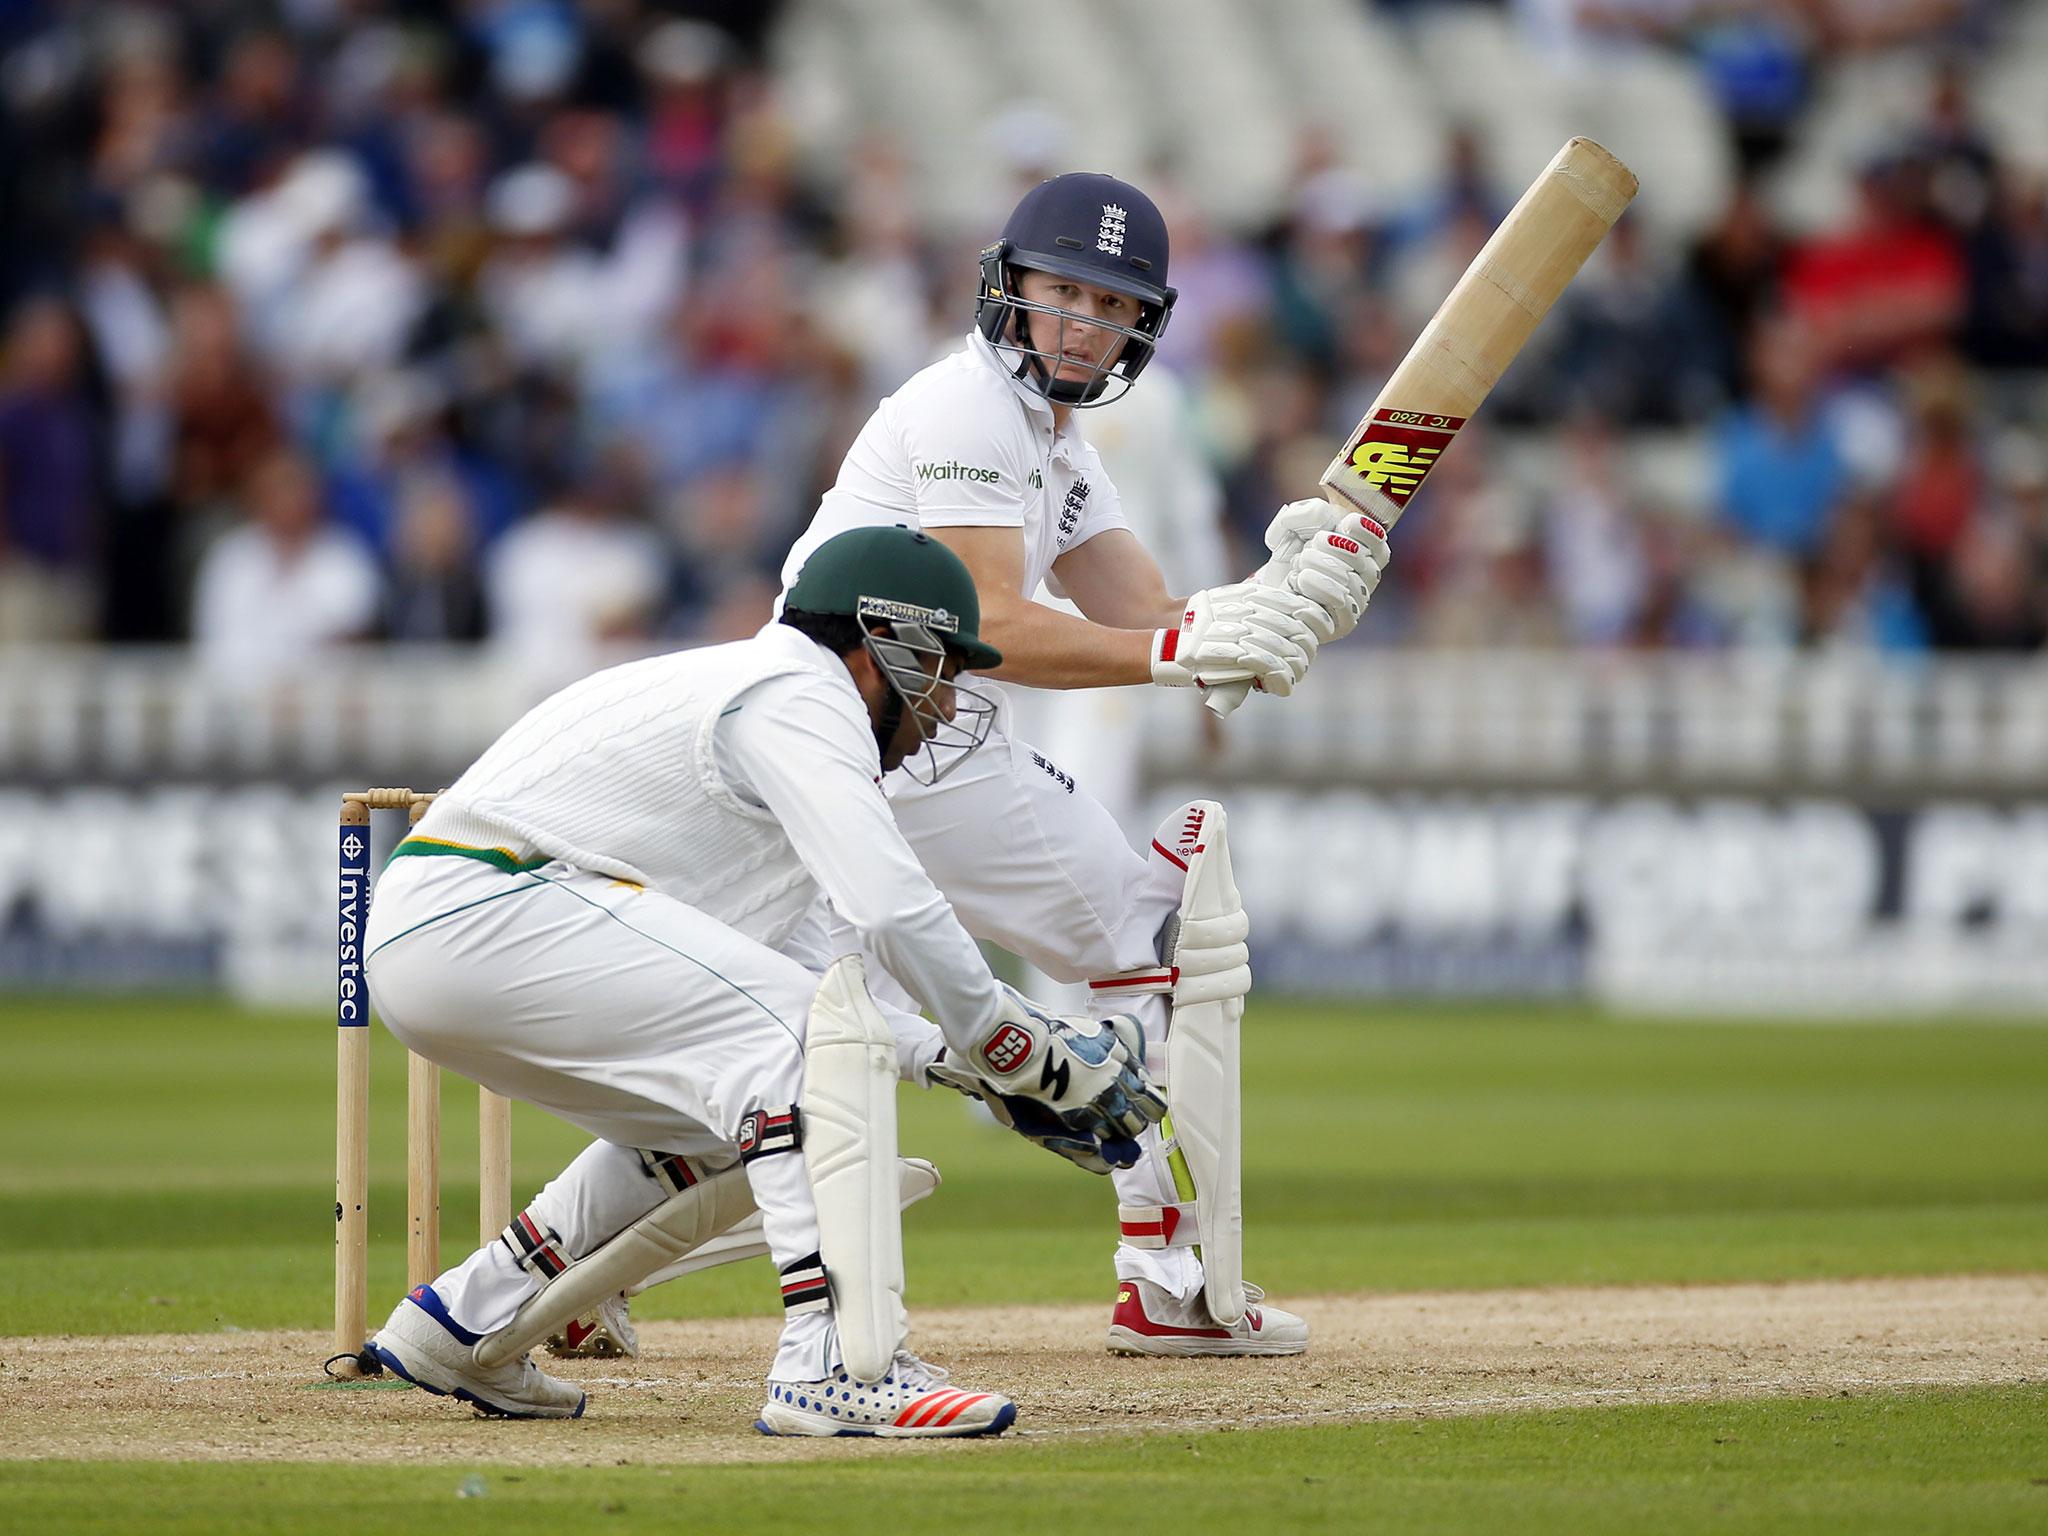 Gary Ballance has been in and out of the England picture over the last year